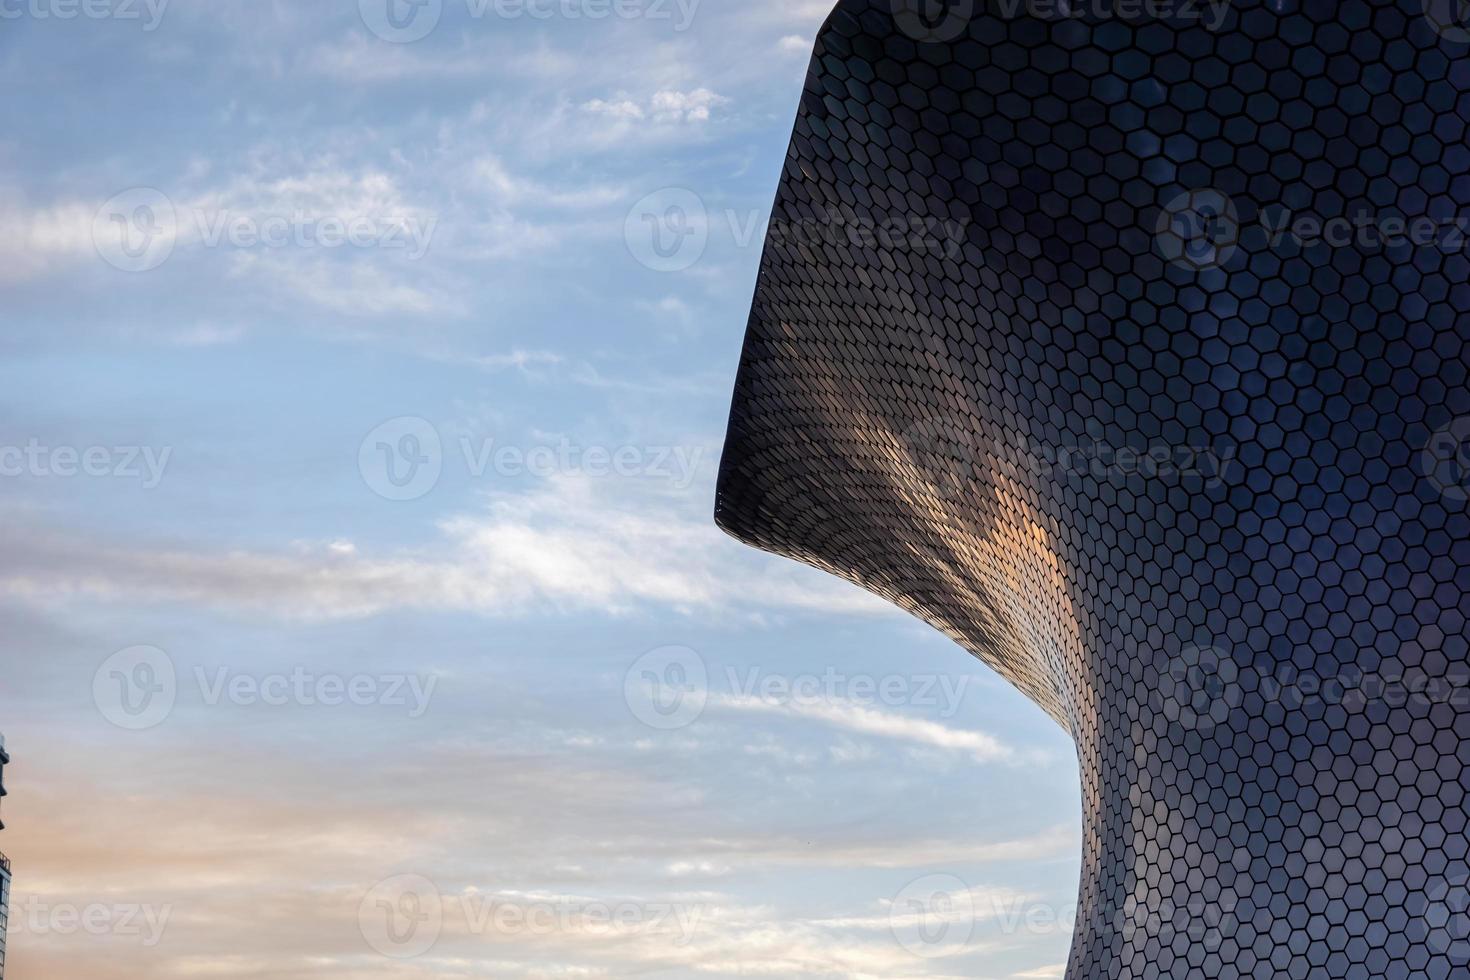 soumaya museum in CDMX, mexico. sunset reflection of the sunset on the building, aluminum panels or alucobon photo